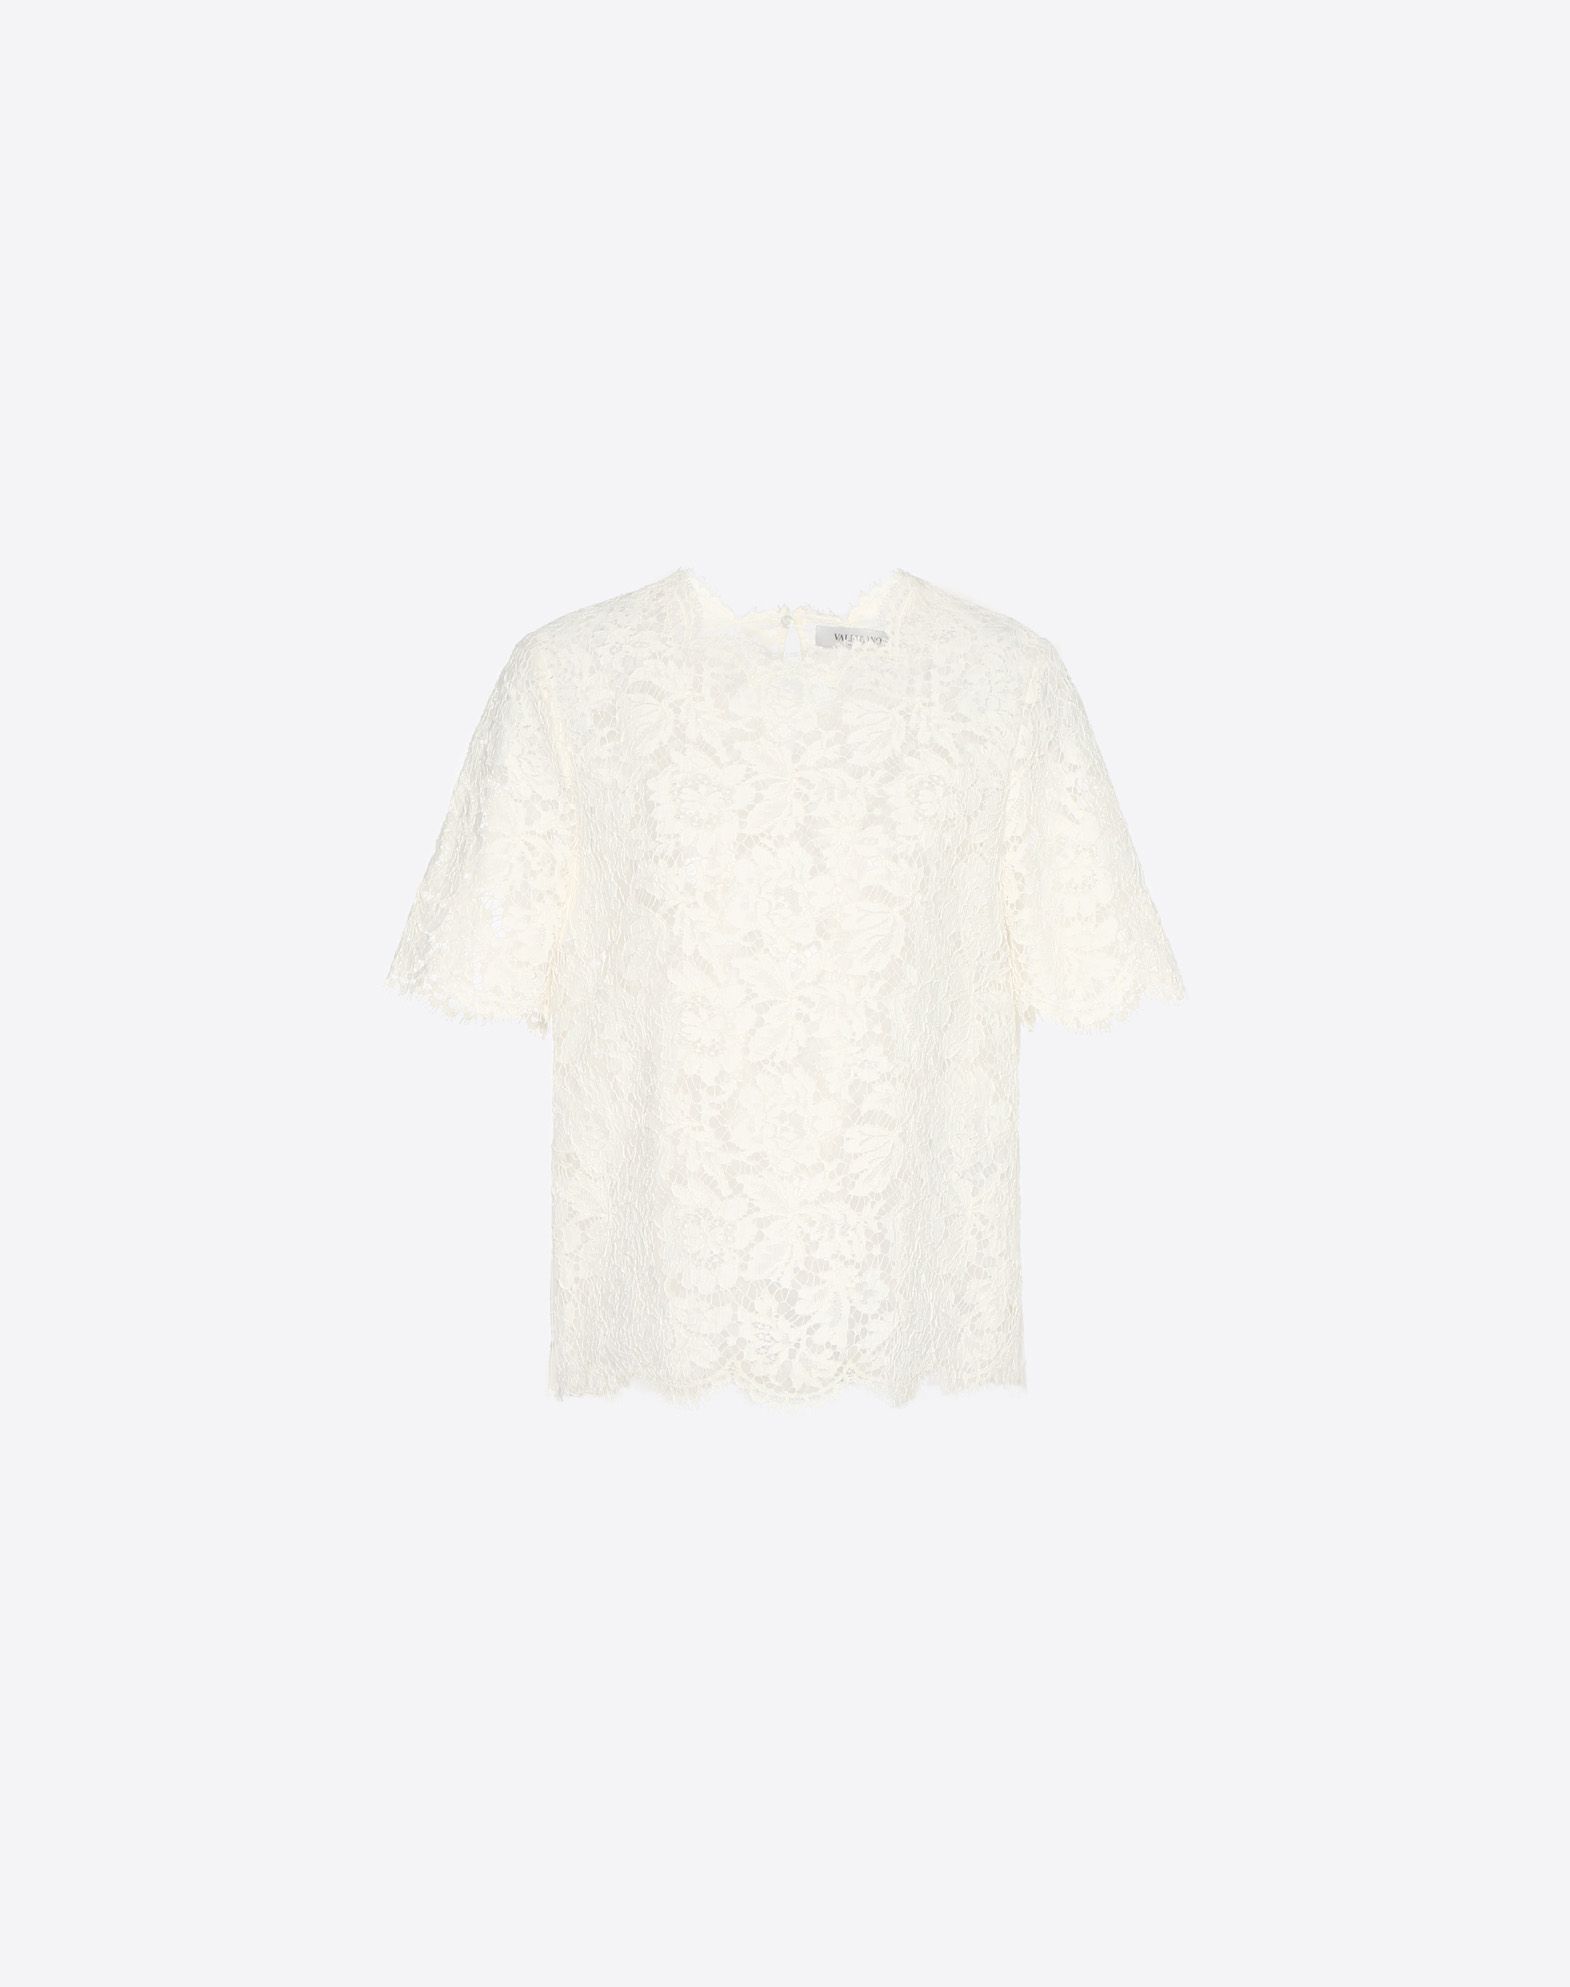 Valentino's Heavy Lace Top Christmas Party Tops